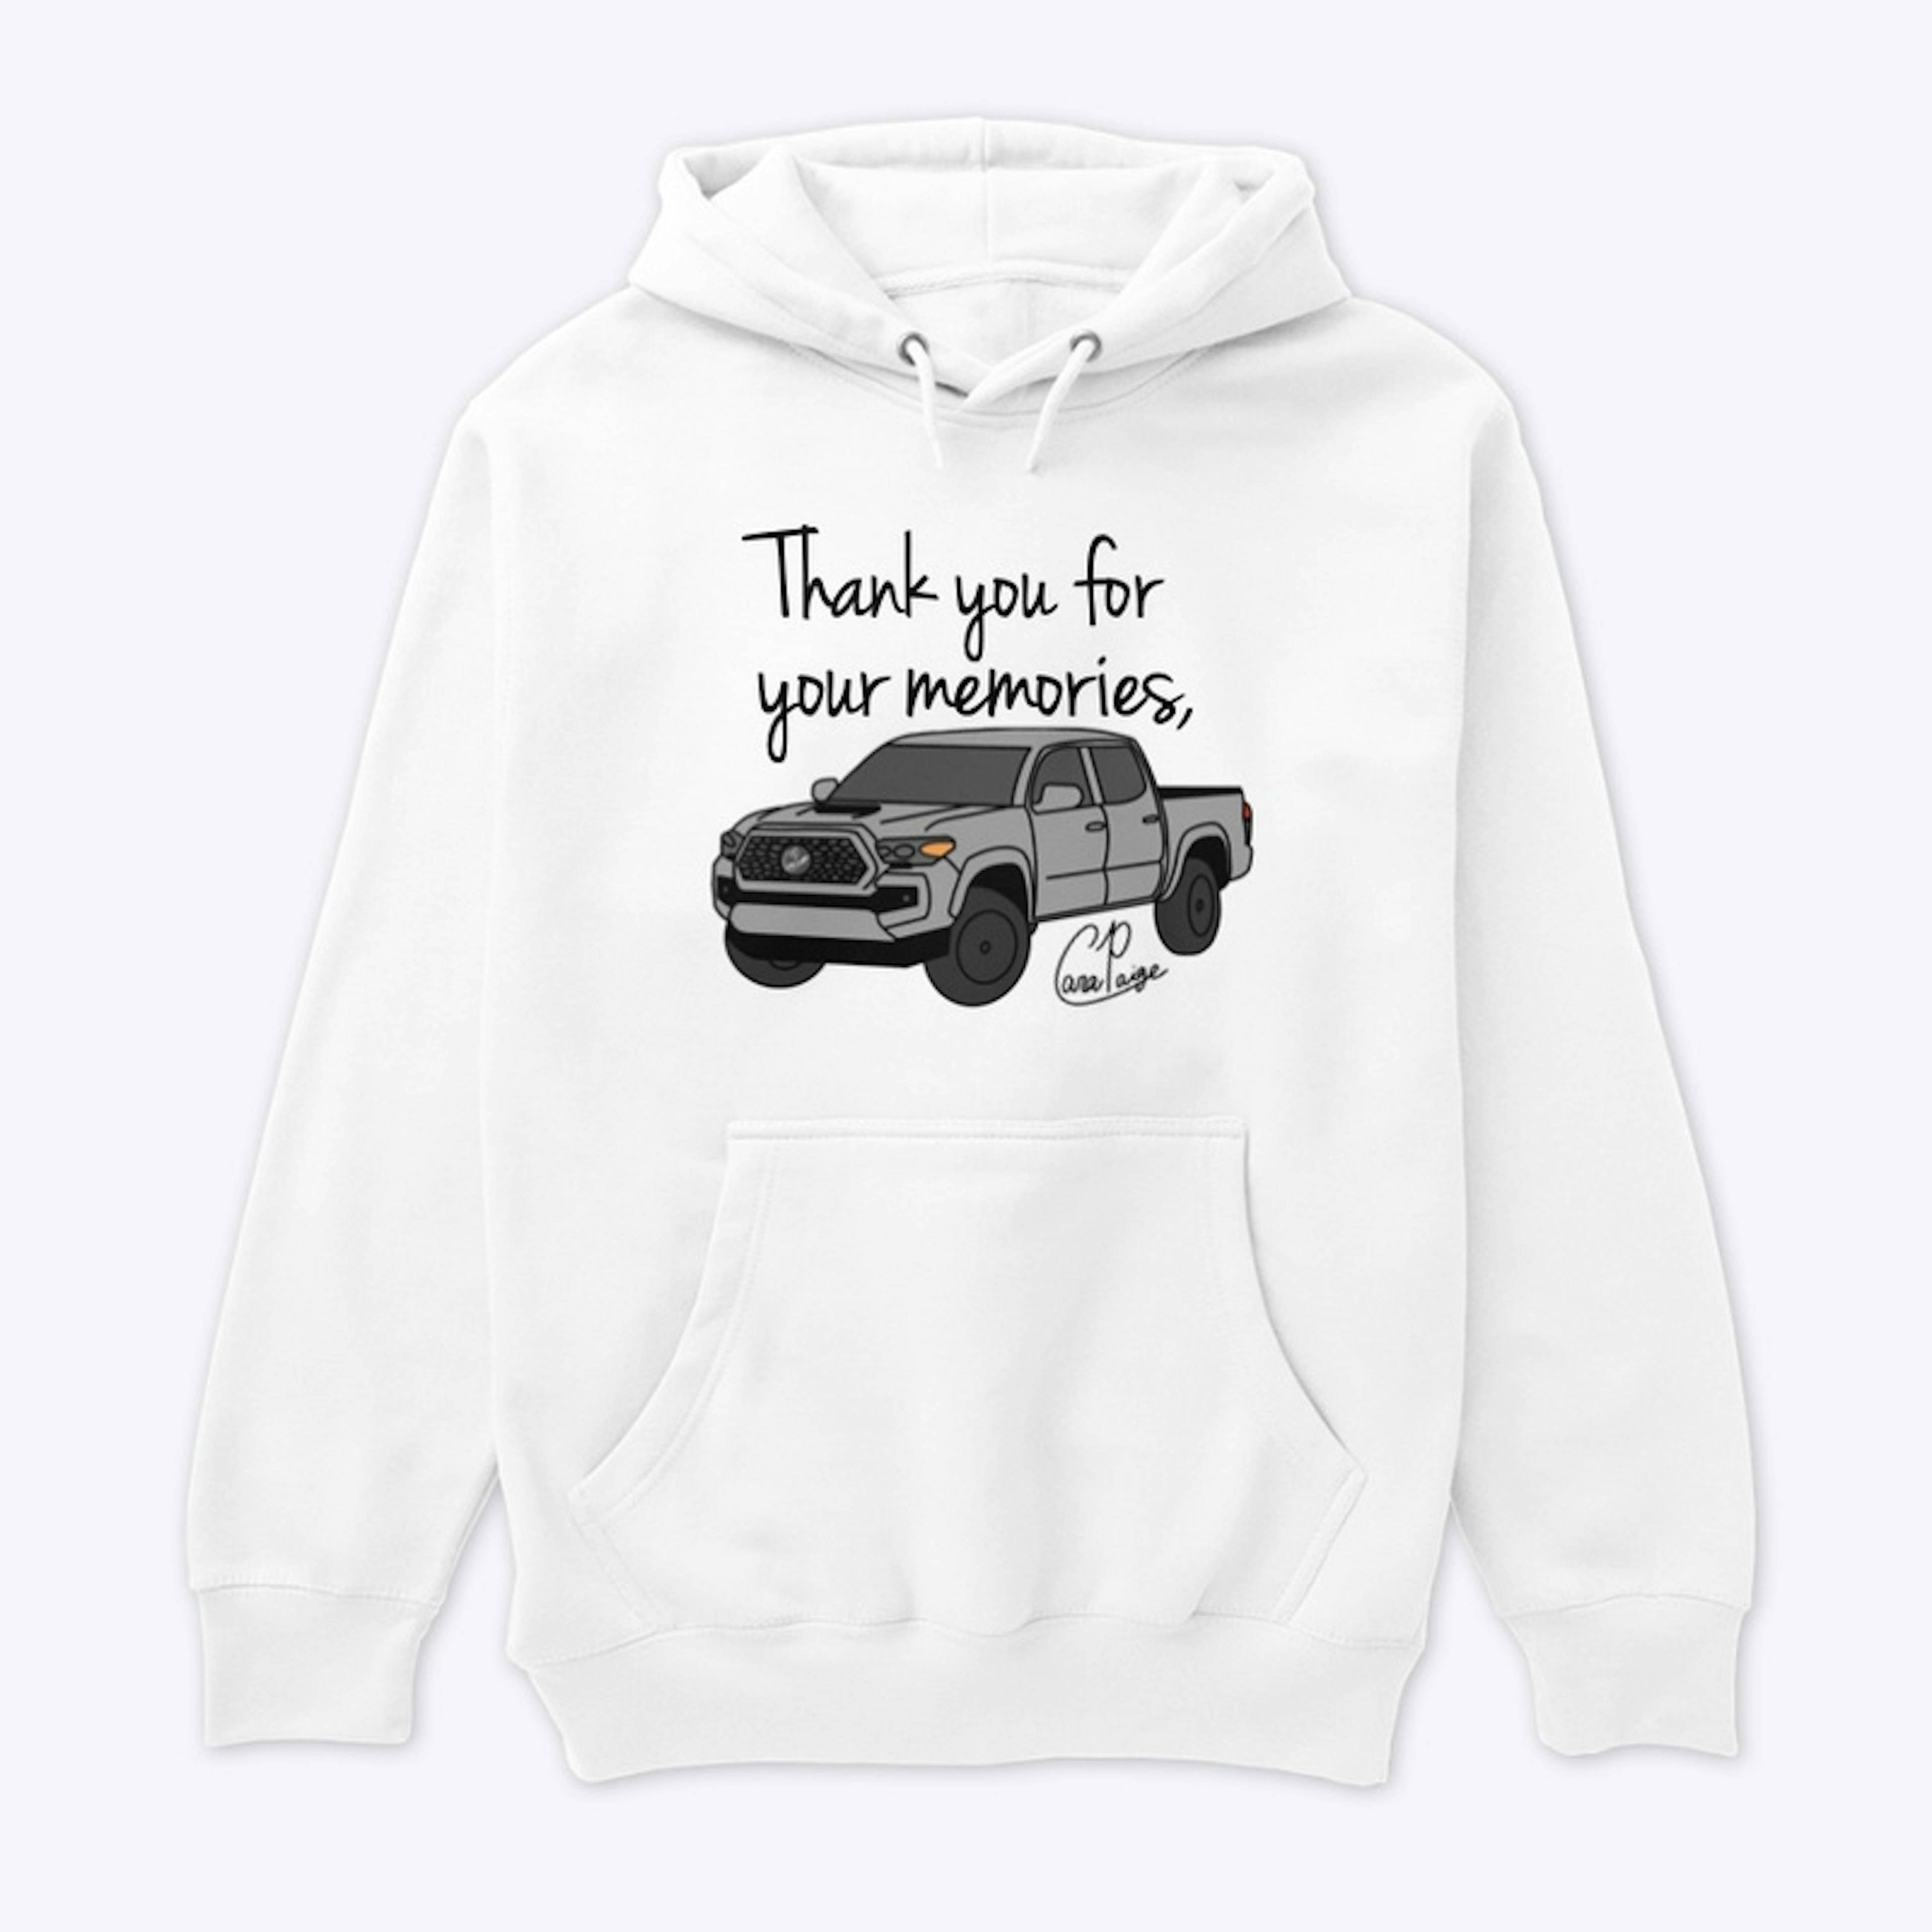 "Thank you for your memories" Tee